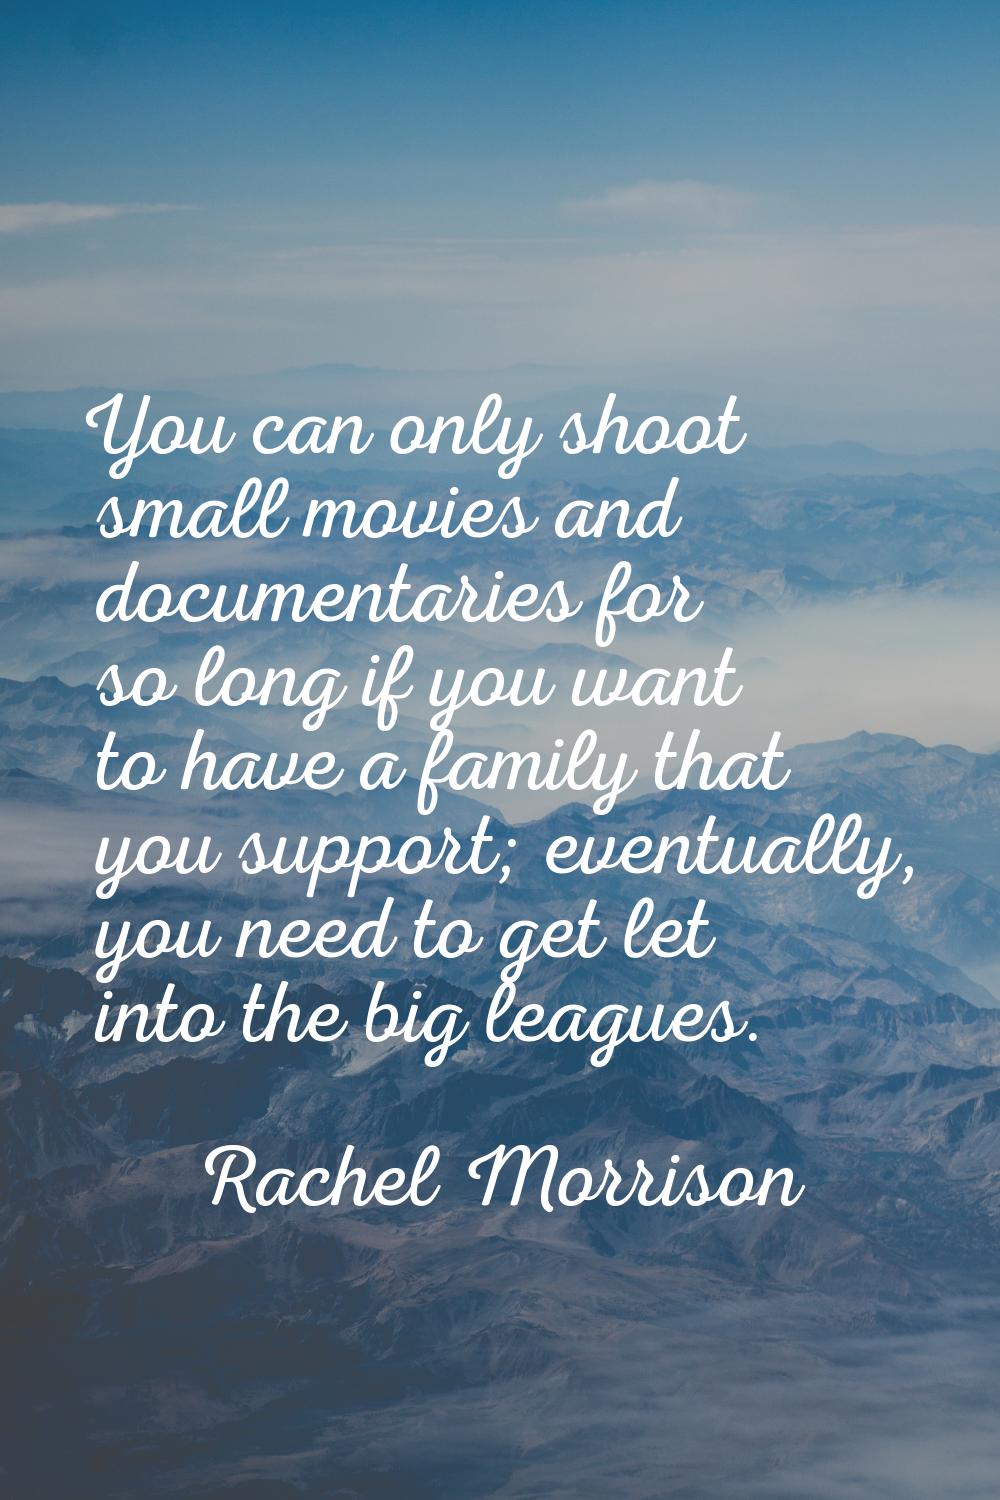 You can only shoot small movies and documentaries for so long if you want to have a family that you